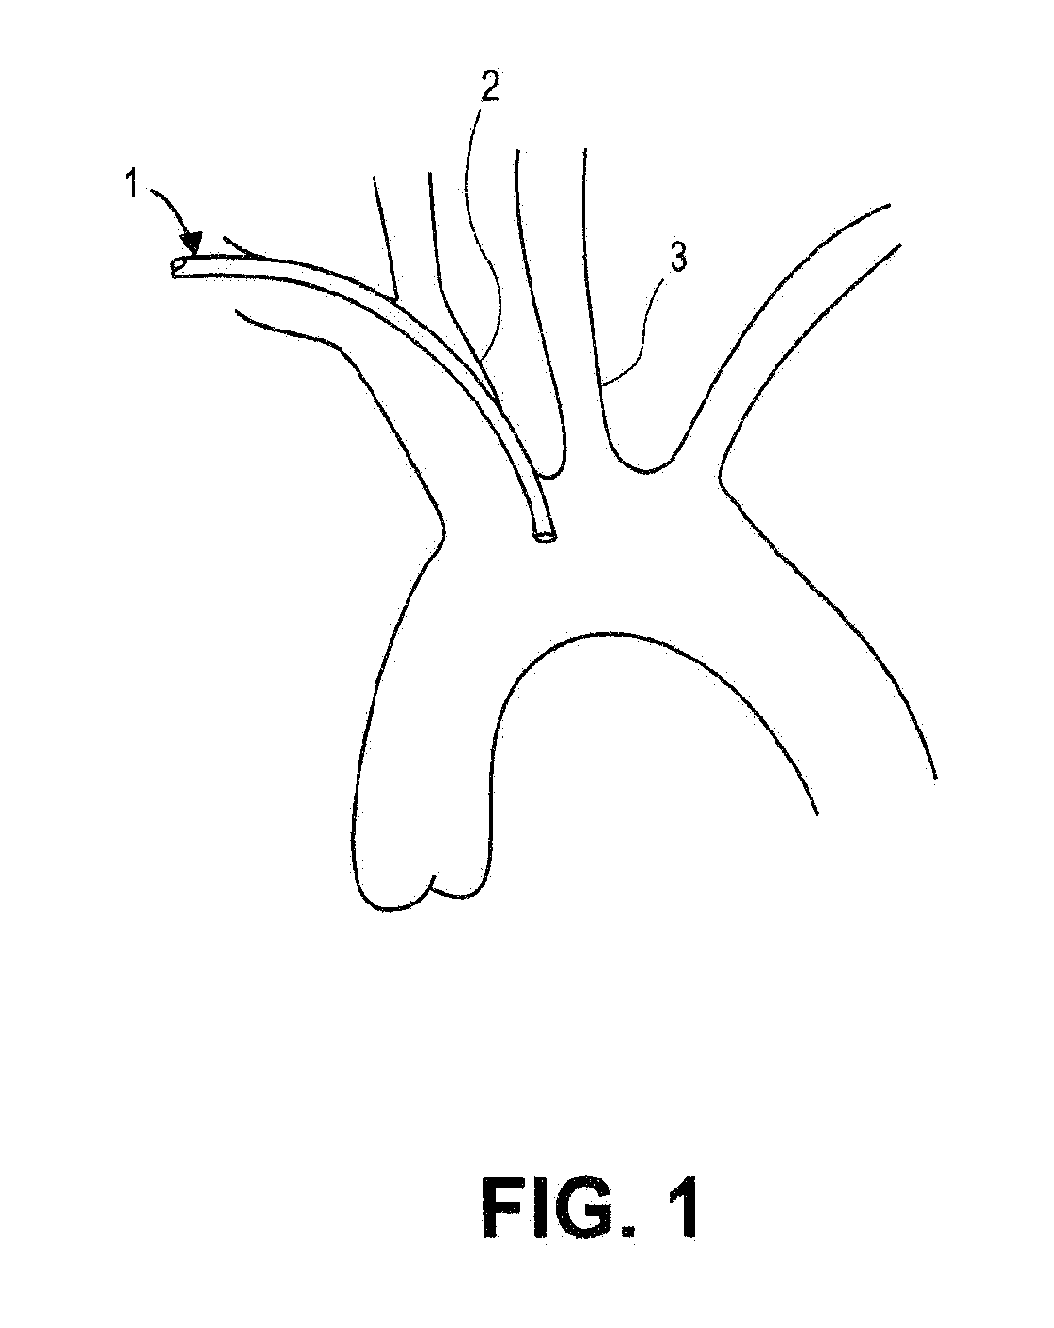 Embolic protection device for protecting the cerebral vasculature